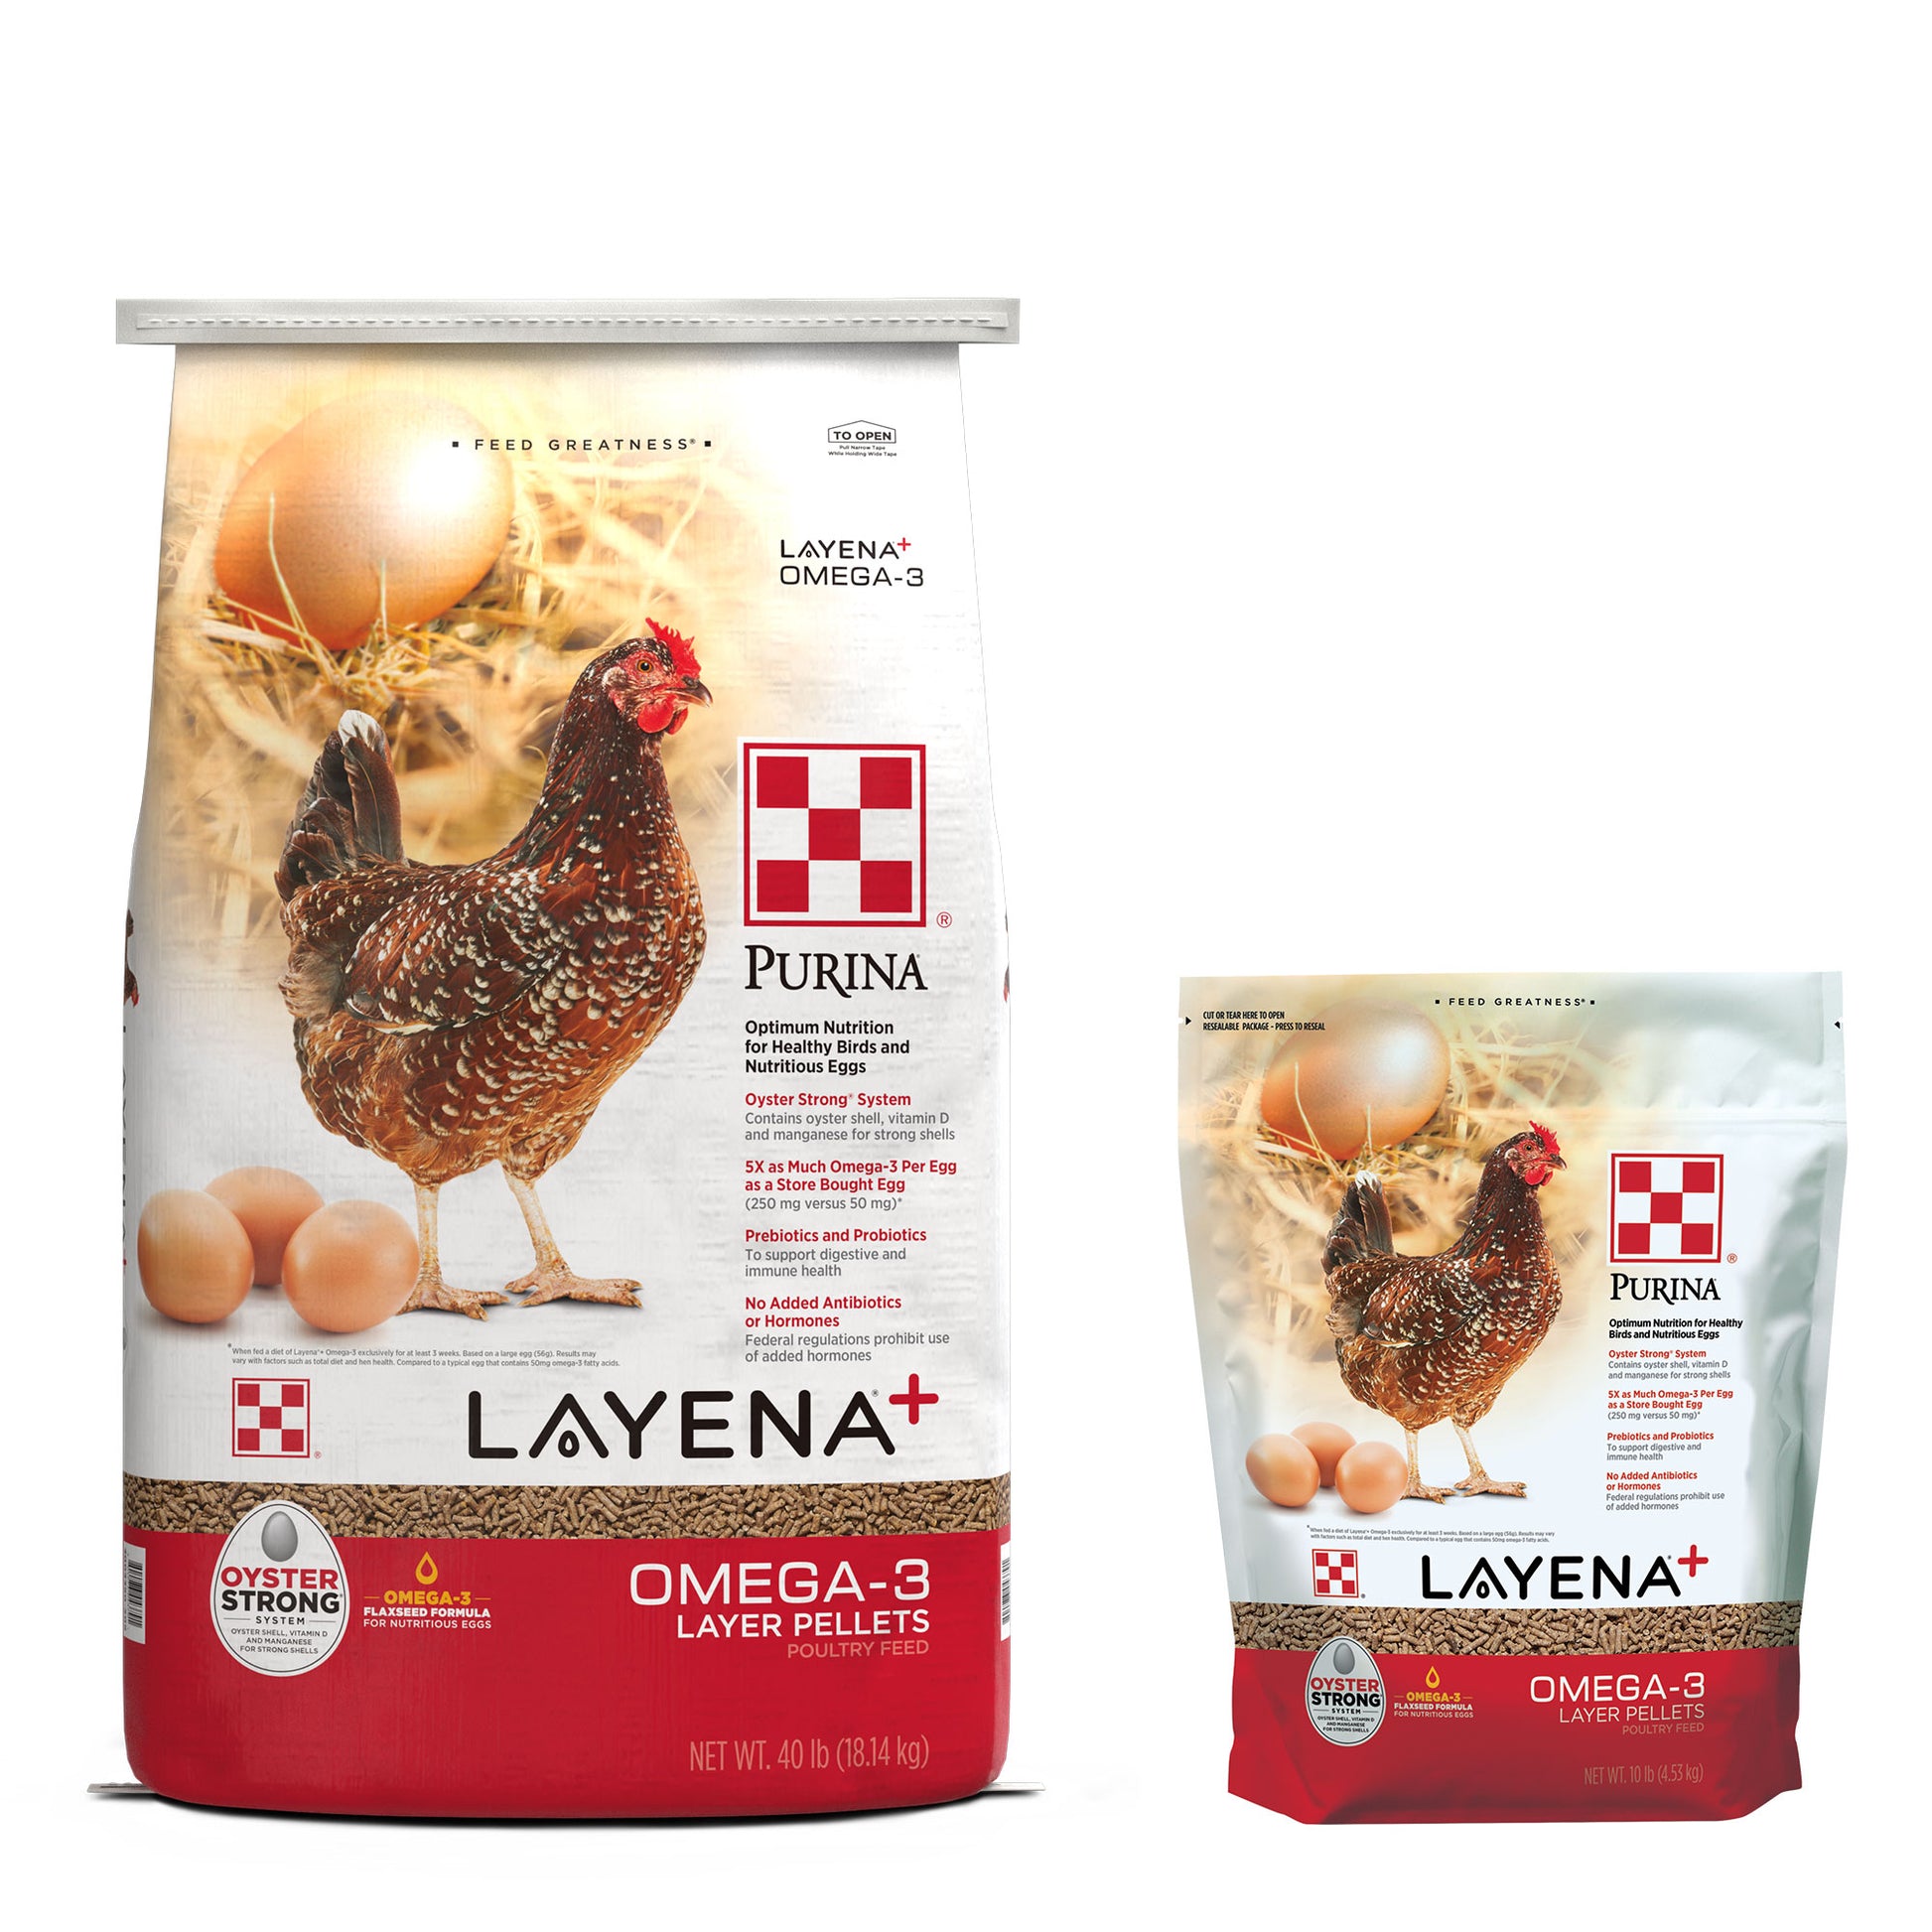 Purina Layena Plus Omega-3 40 Pound Bag and 10 pound pouch grouped together